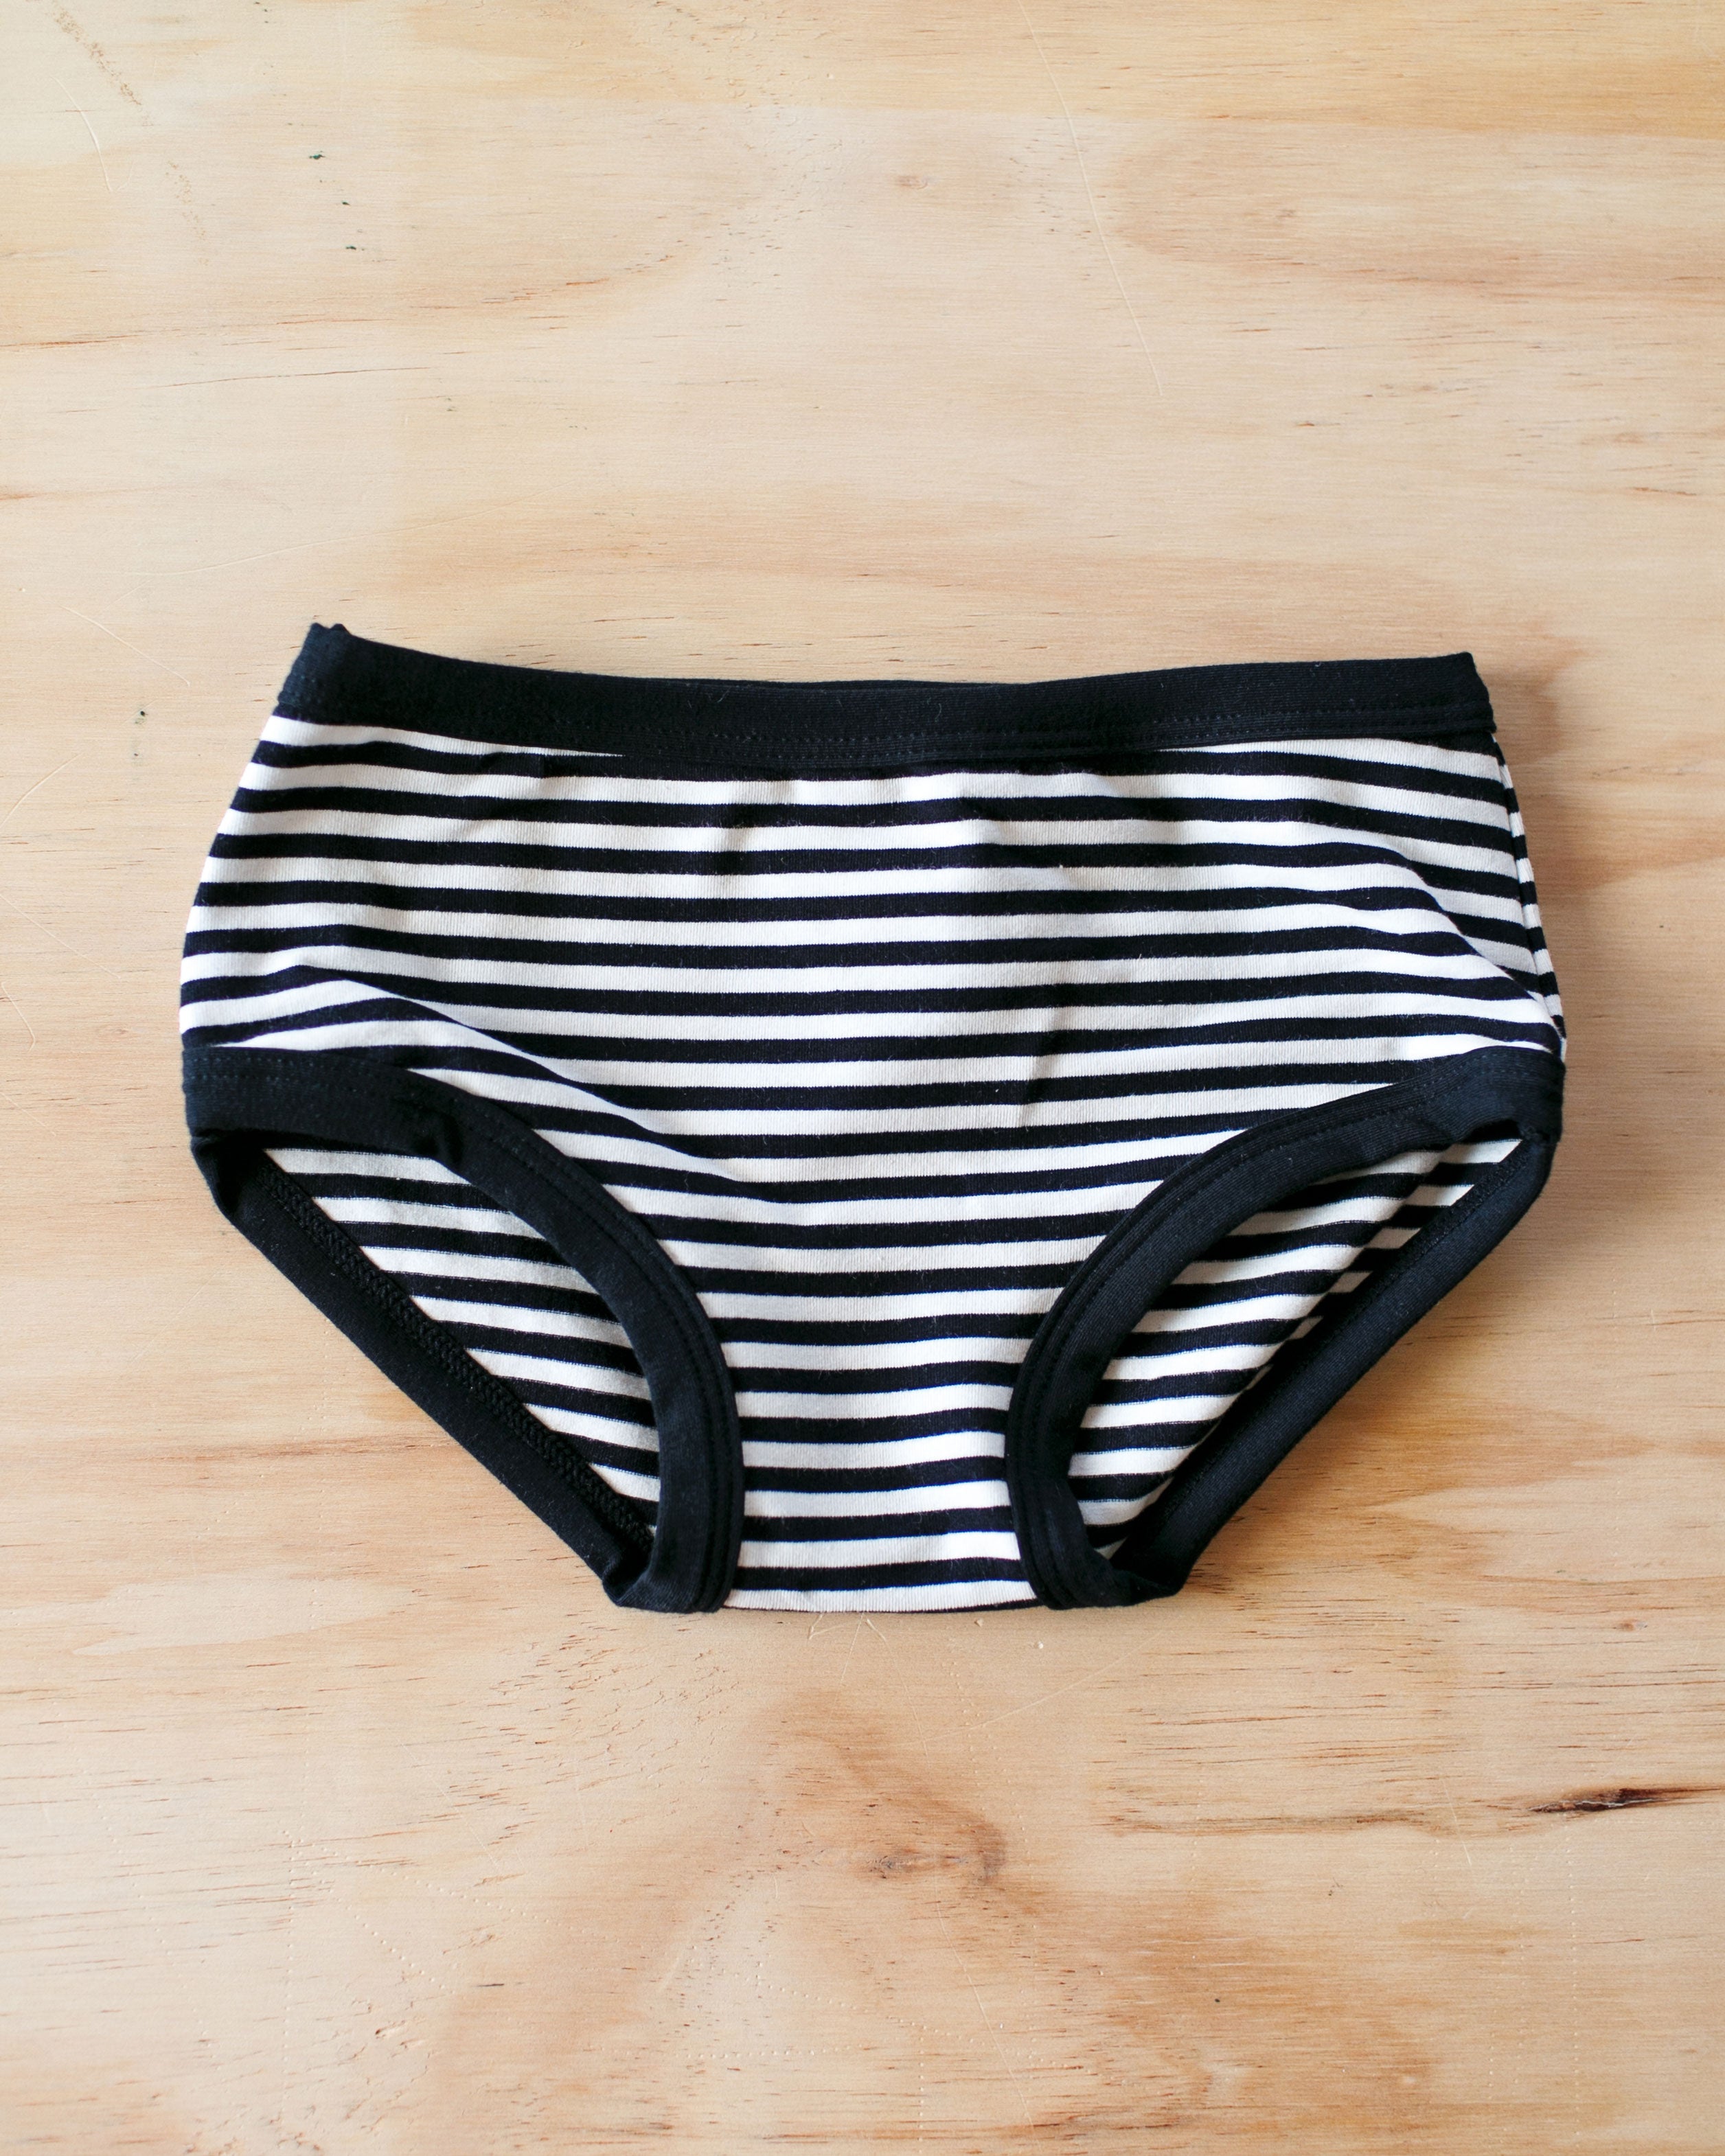 Flat lay of Thunderpants organic cotton Kids style in Black and White Stripes.